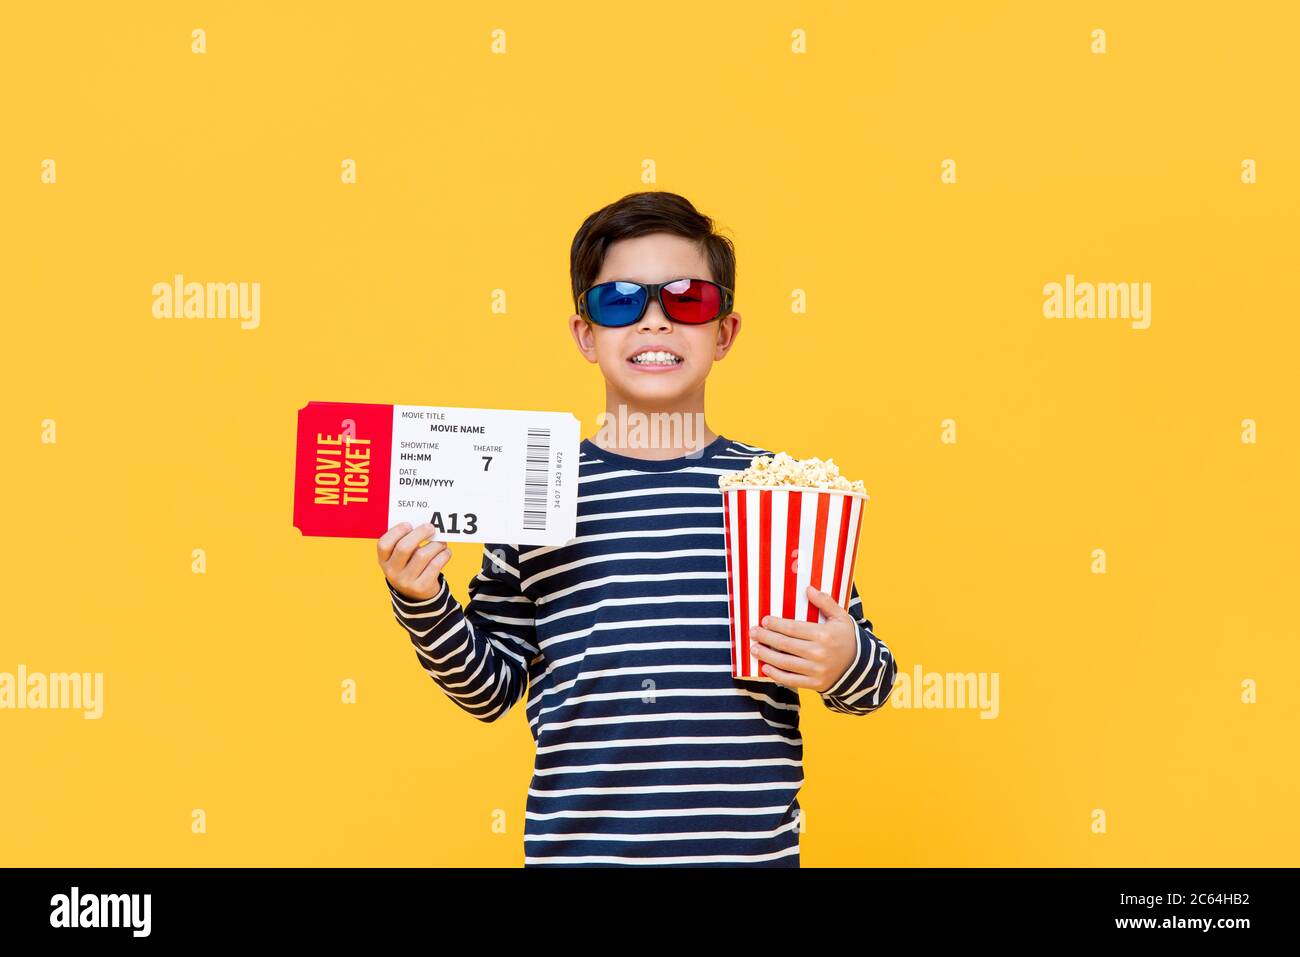 Fun portrait of happy young Asian boy wearing 3D glasses holding popcorn and movie ticket in isolated studio yellow background Stock Photo